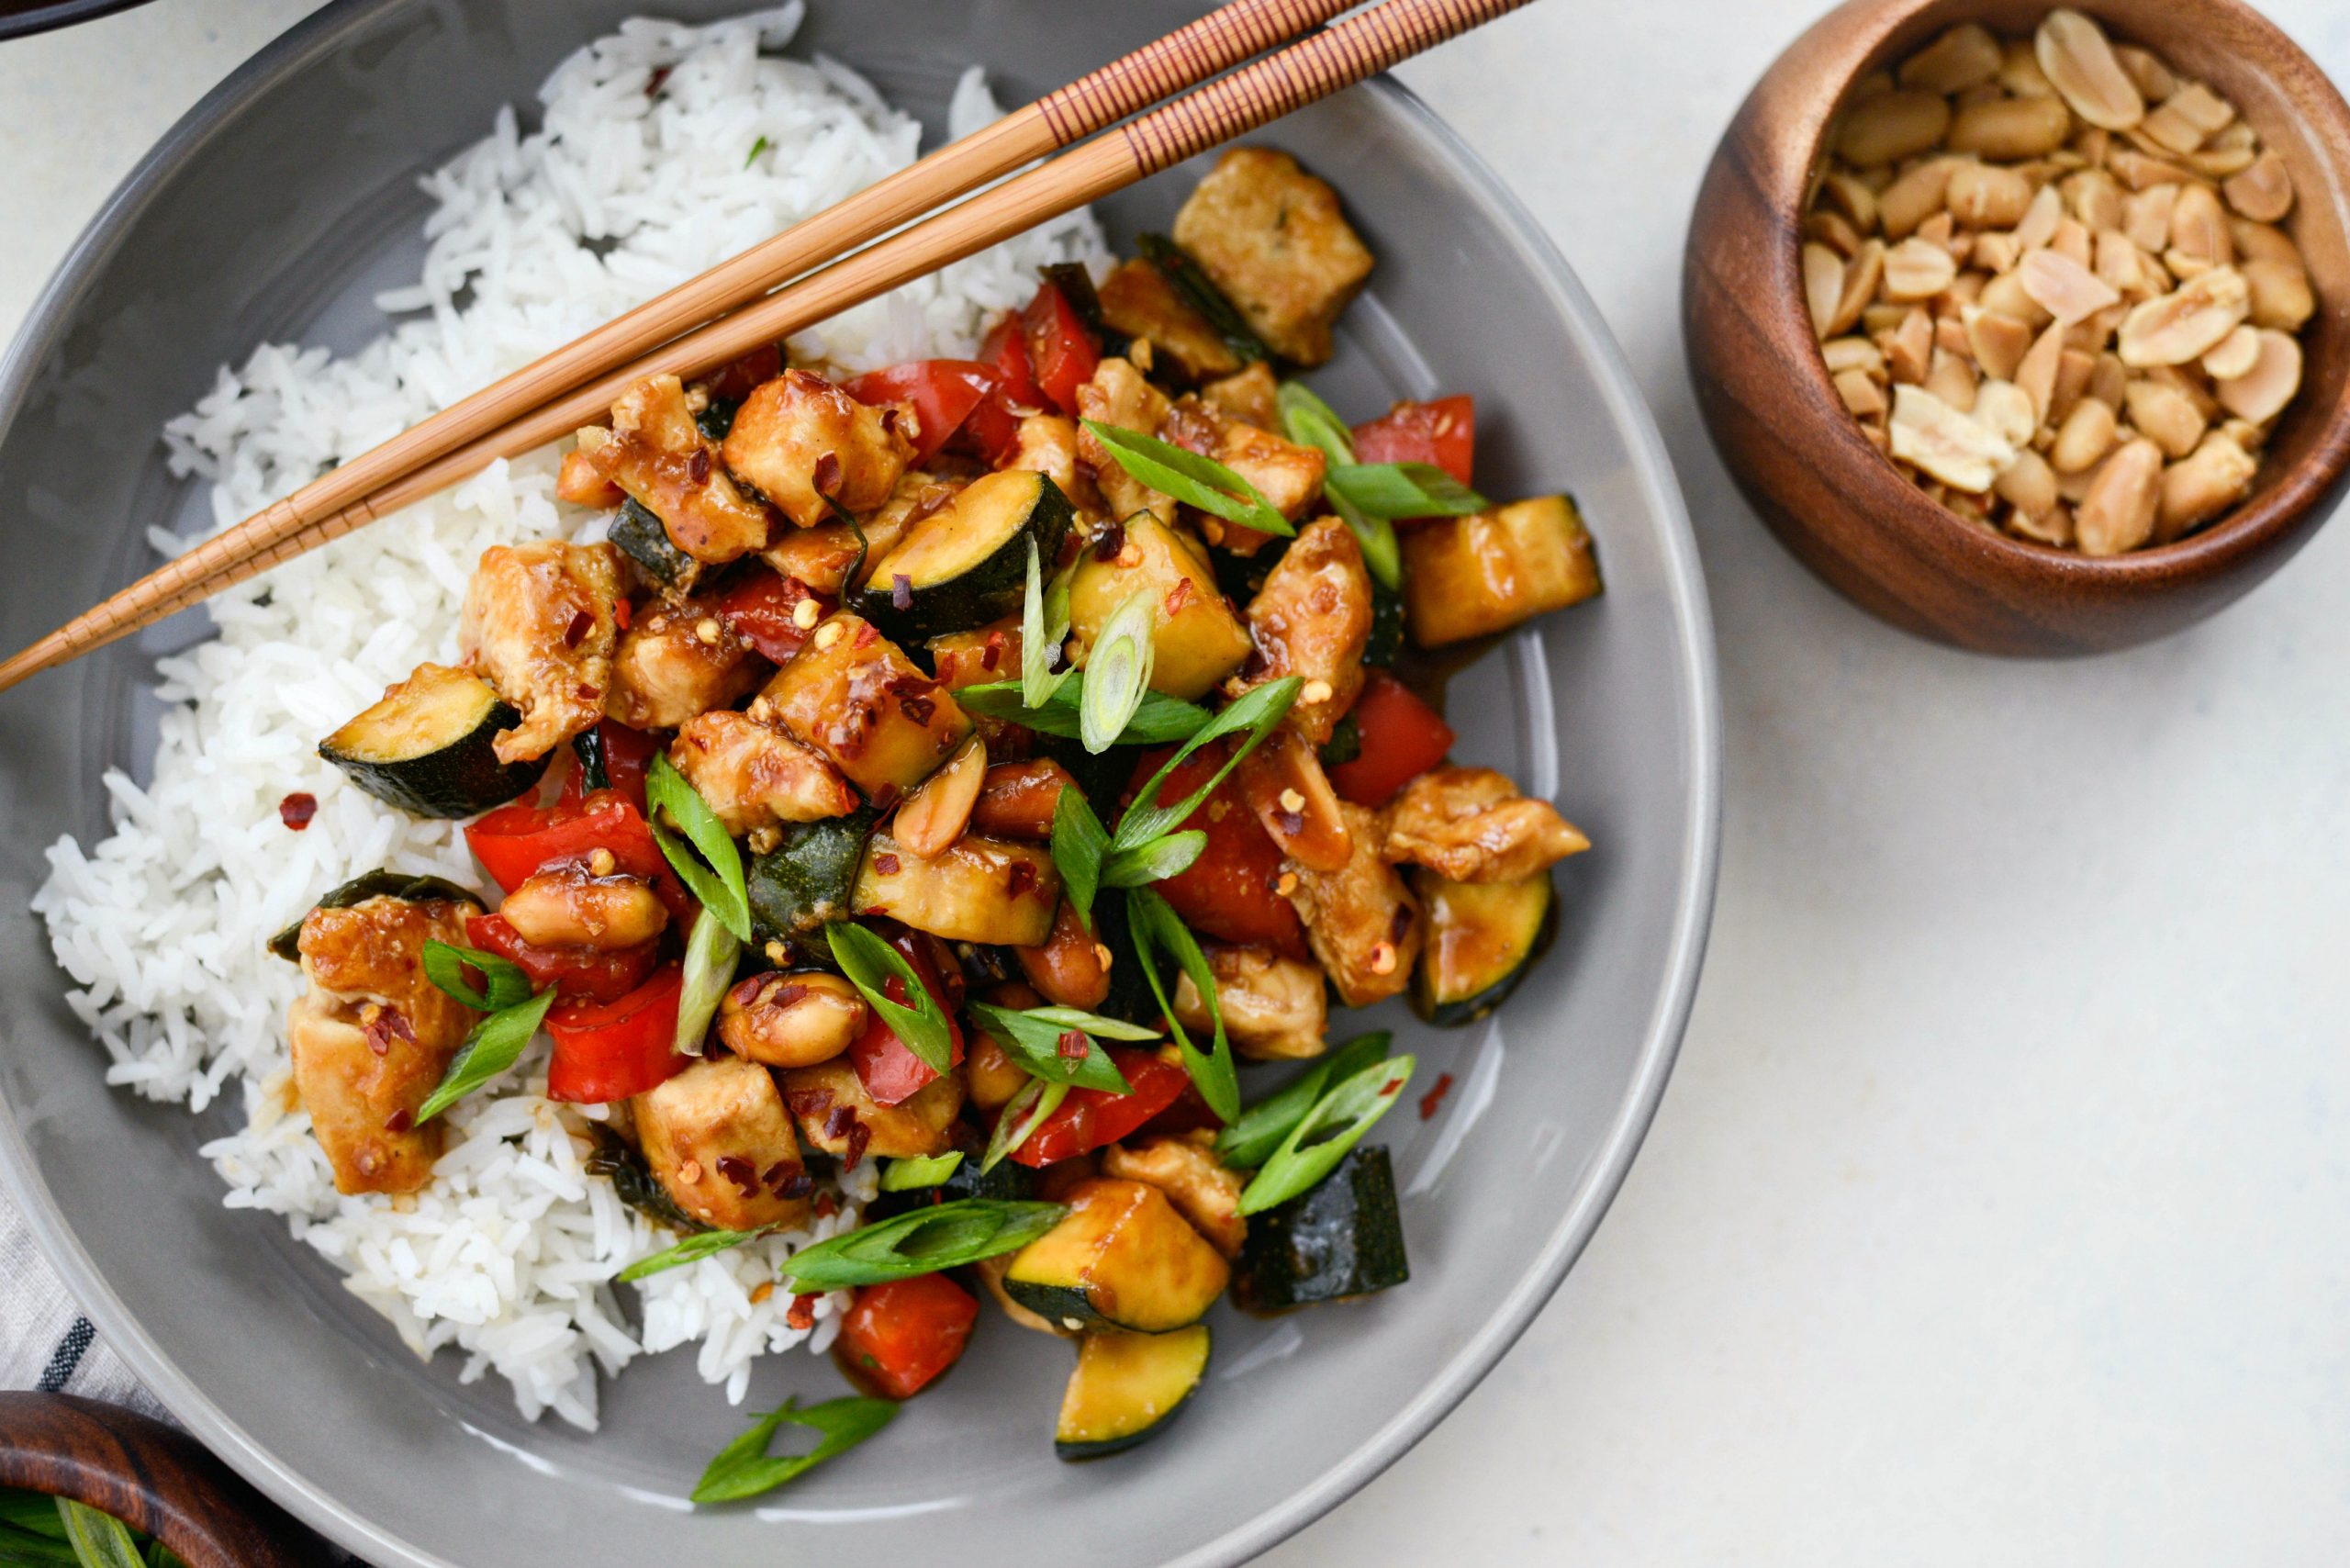 An Eat'n Man: Stir Fry - On the Grill - Kung Pao Chicken